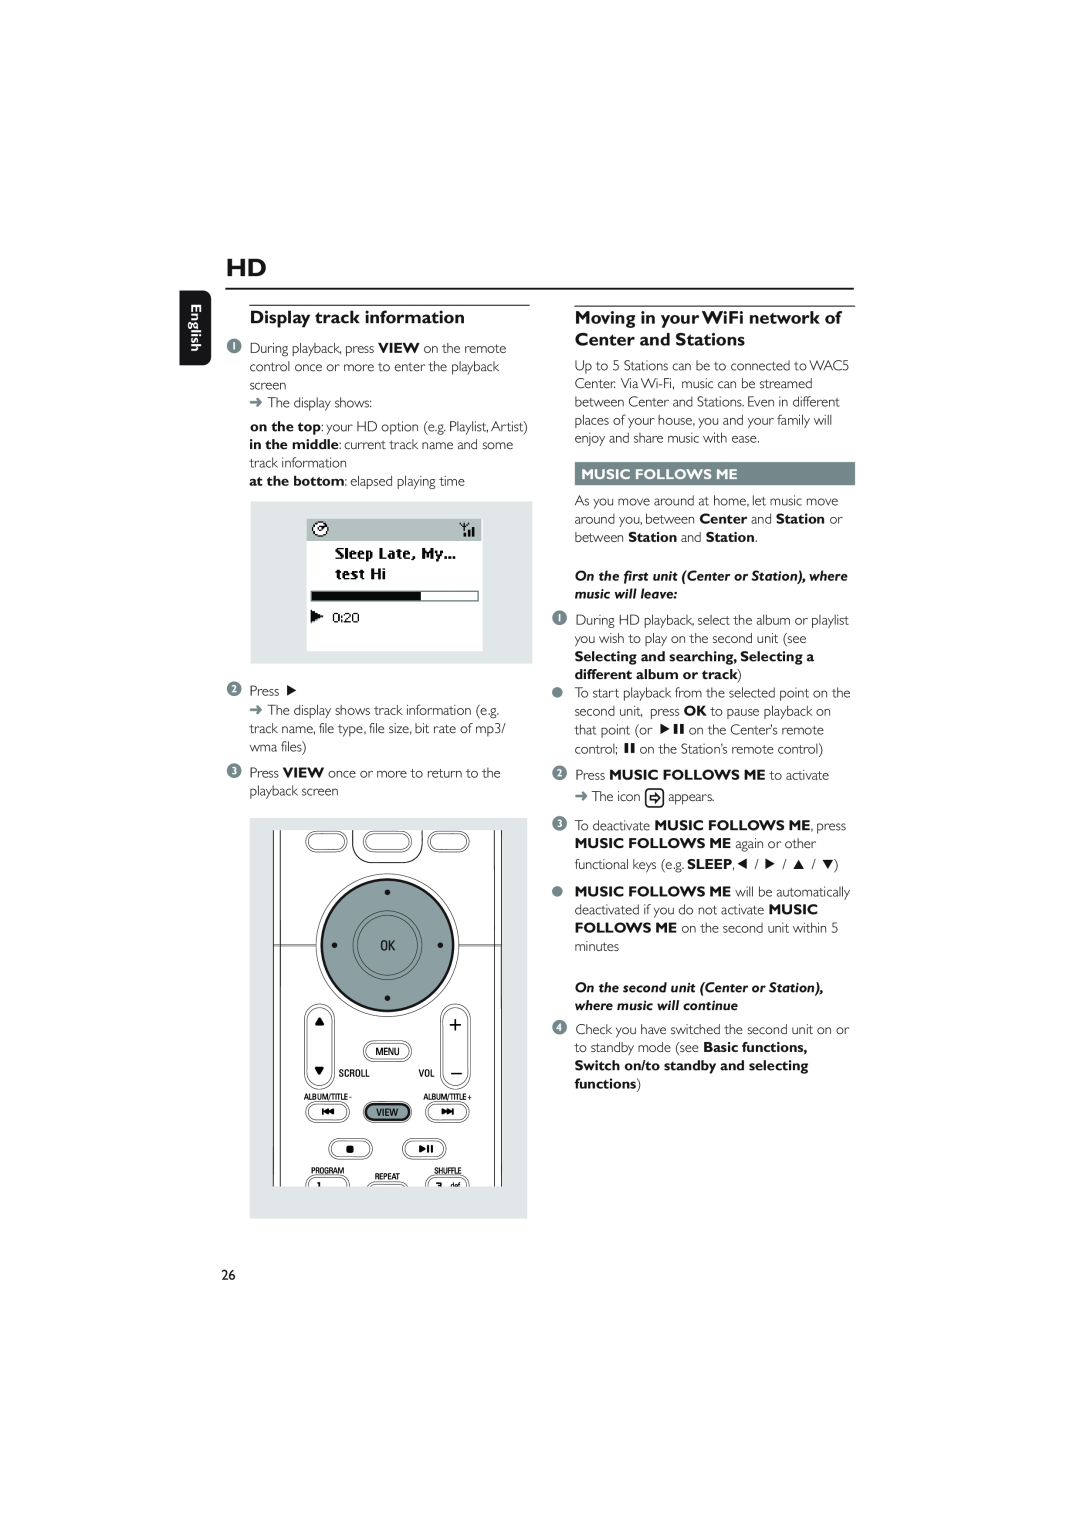 Philips WAC5 user manual Display track information, English, Music Follows Me, Switch on/to standby and selecting functions 